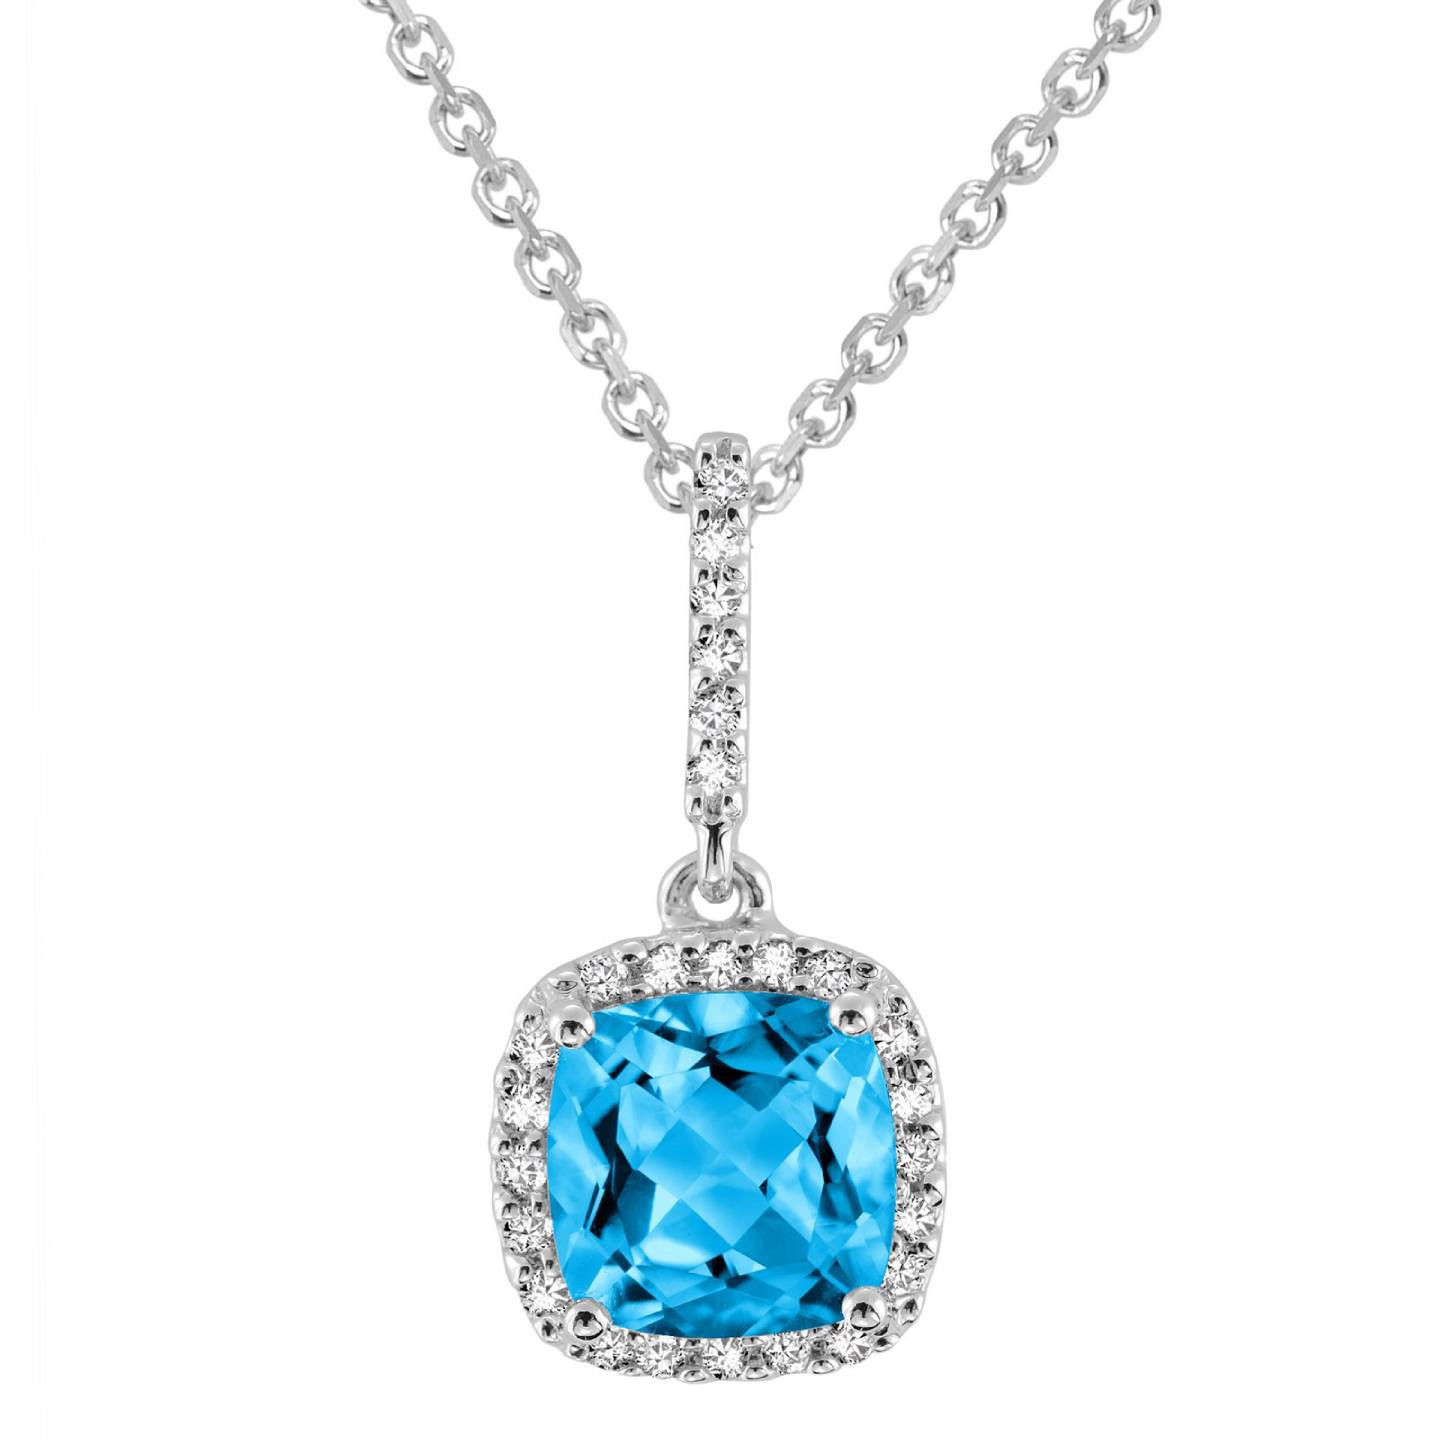 1 3/4 CTW Cushion Blue Topaz Halo Pendant Necklace in 14K White Gold With Chain (MV3145)